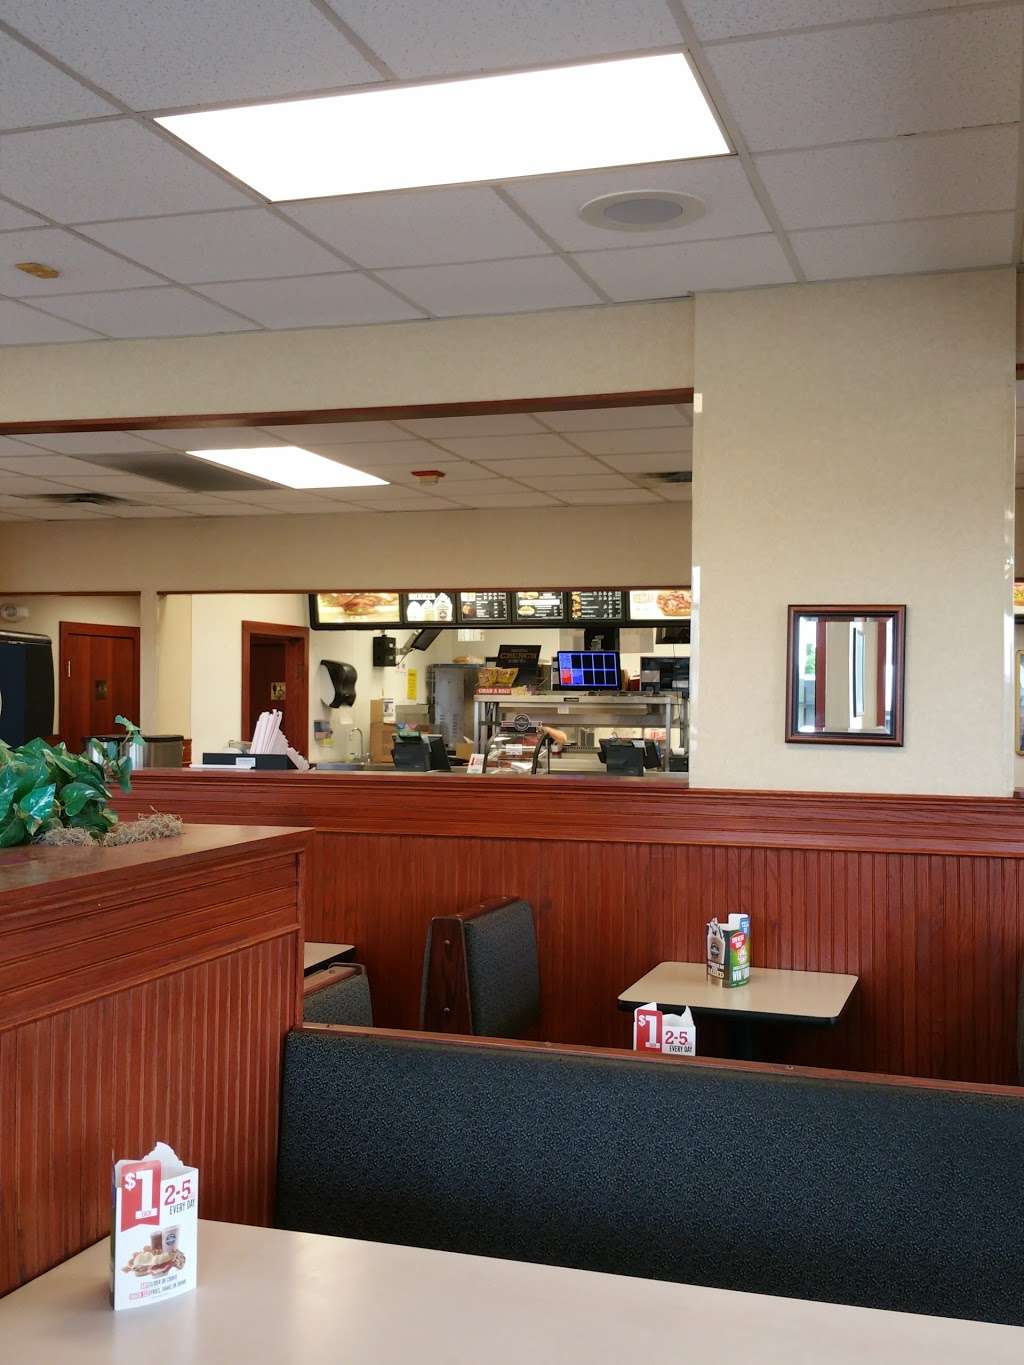 Arbys | 7601 Westgate Dr, Fort Collins, CO 80528, USA | Phone: (970) 225-6064